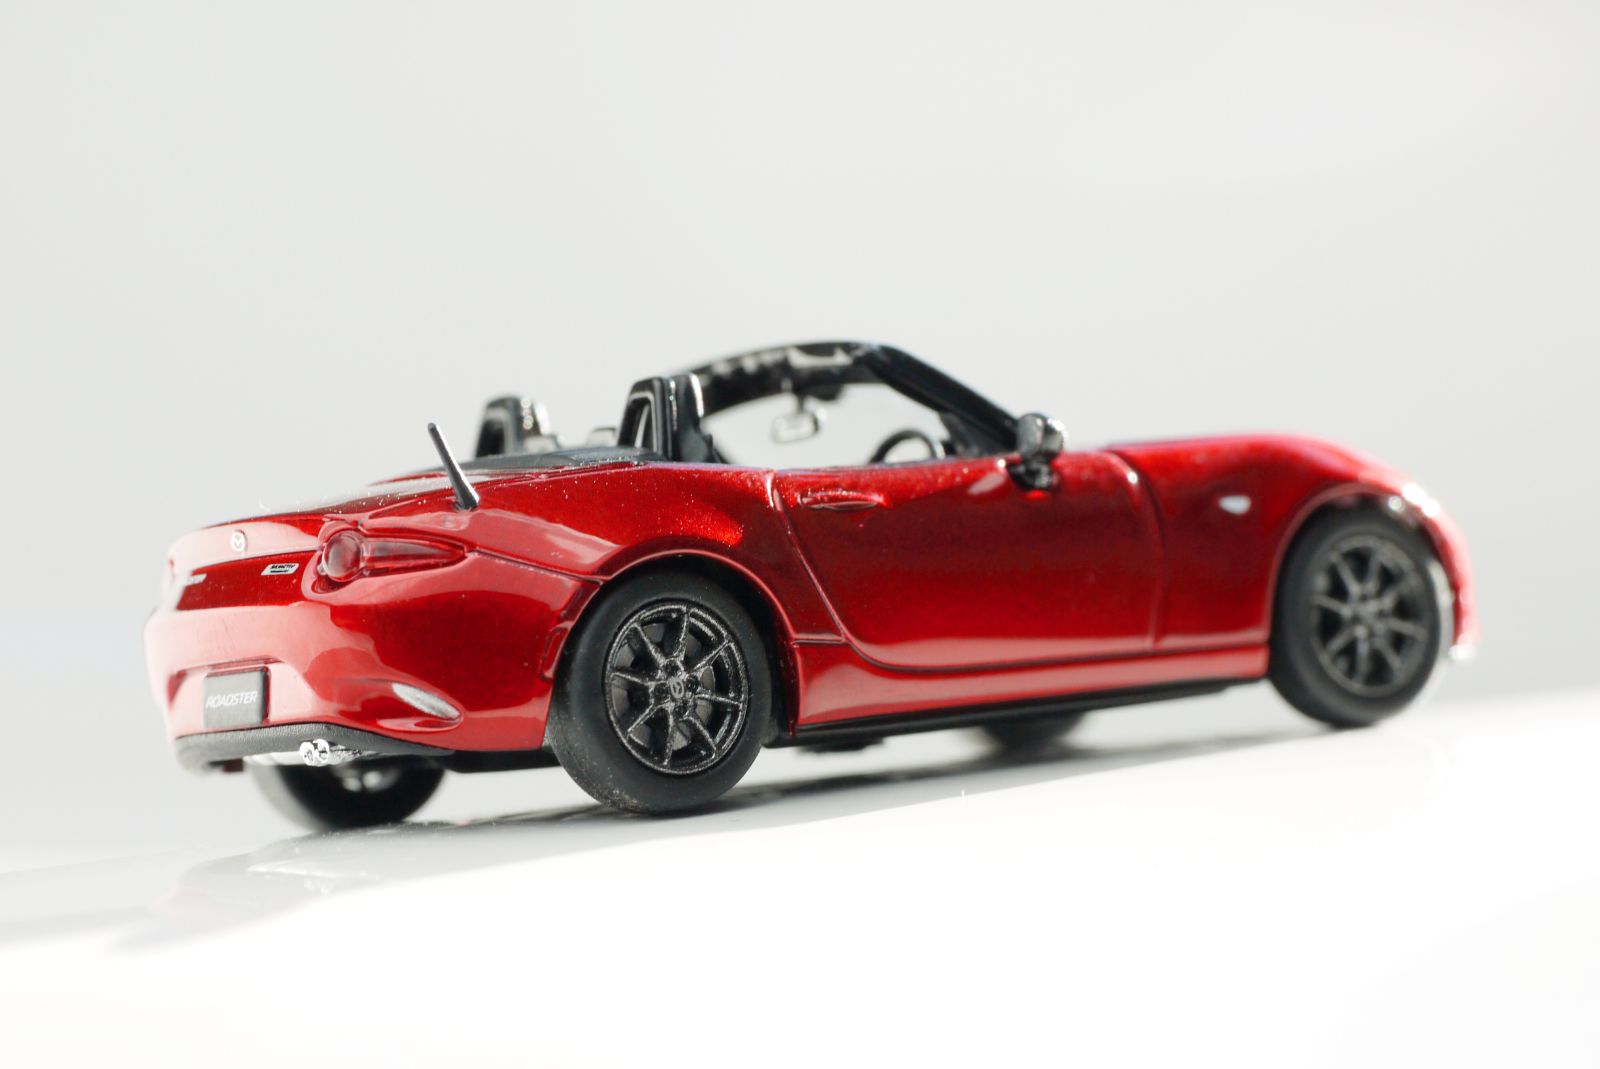 Illustration for article titled Oversteer 1/64 #1 - Project Zoom Zoom #1 - Mazda Roadster miata